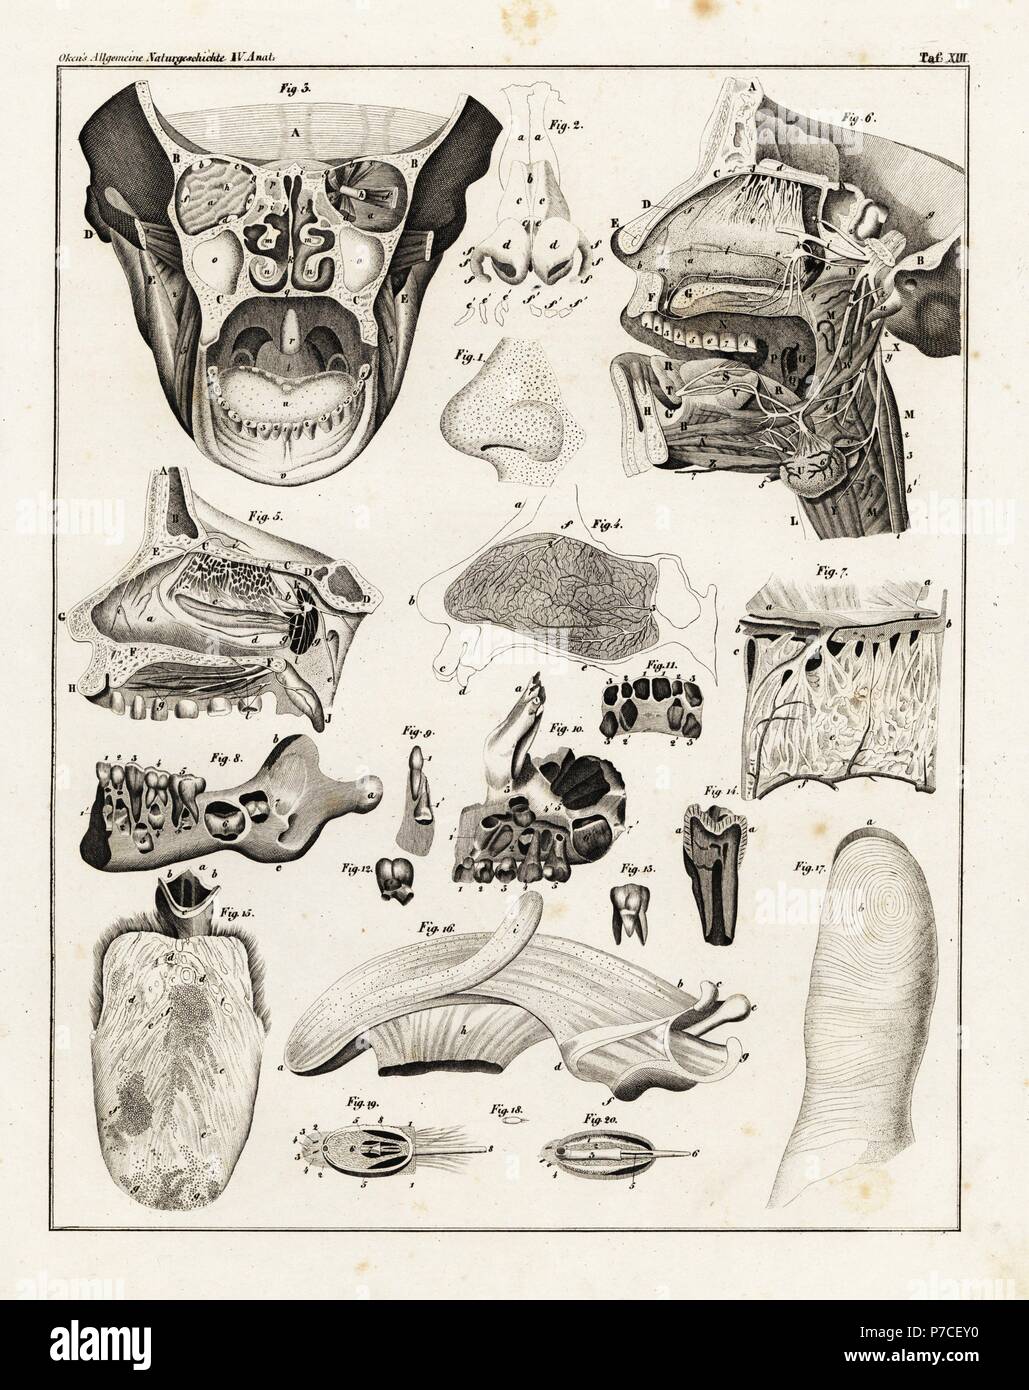 Anatomy of the human nose, mouth, tongue, jaw and teeth, showing the senses of taste, smell and touch. Lithograph from Lorenz Oken's Universal Natural History, Allgemeine Naturgeschichte fur alle Stande, Stuttgart, 1839. Stock Photo